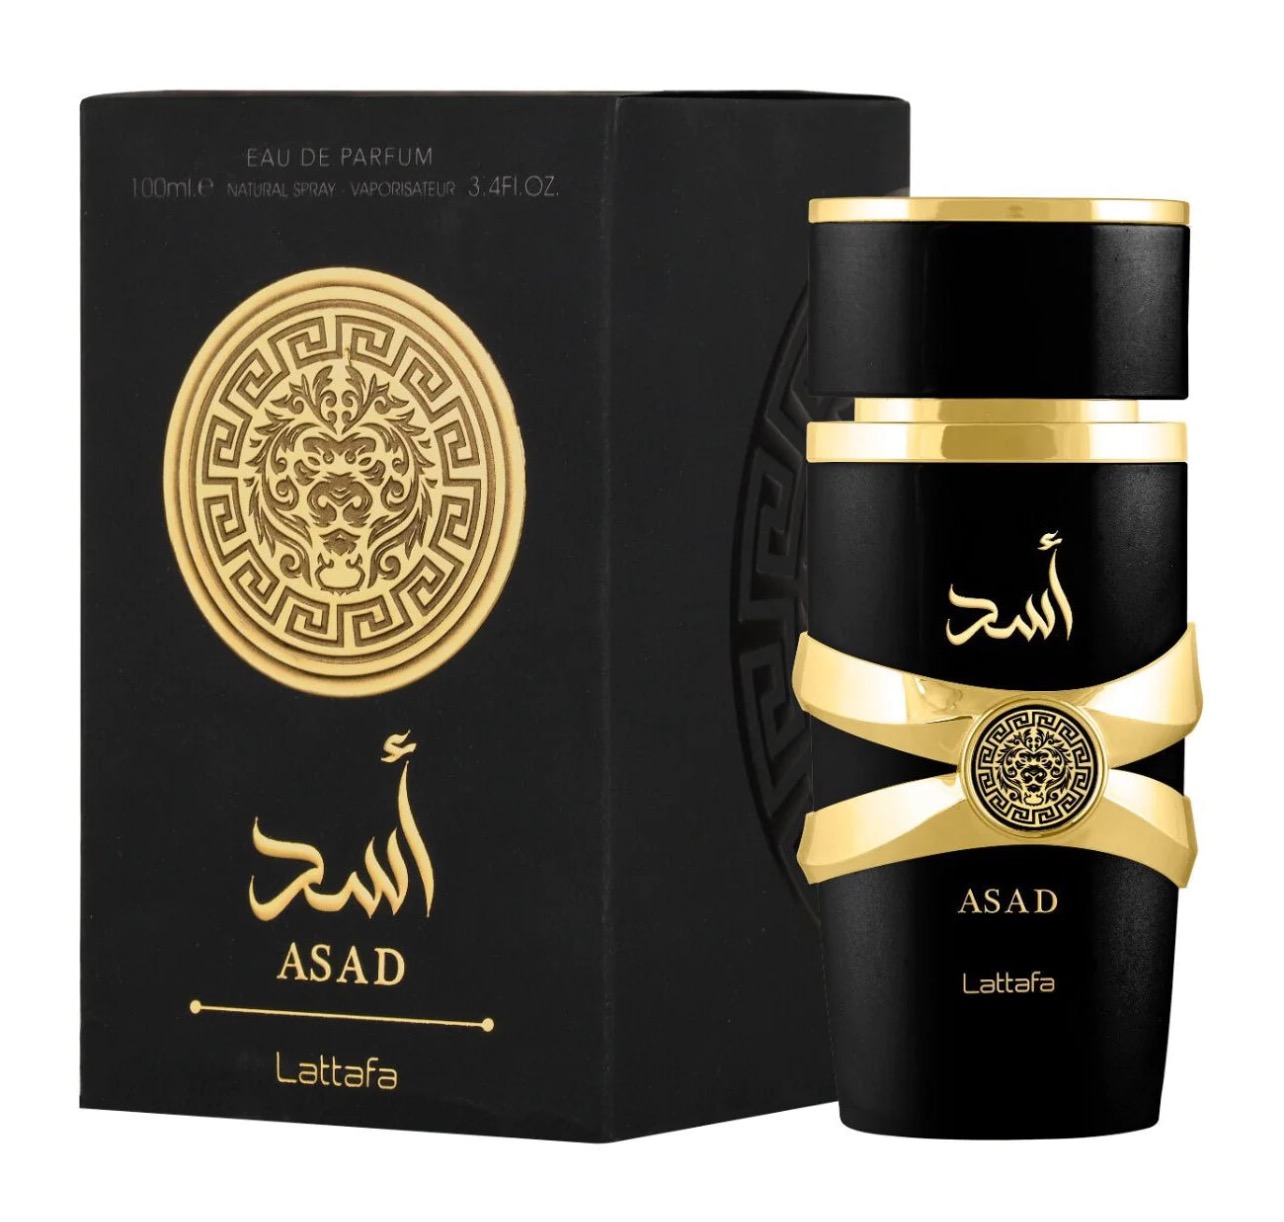 Top: Black Pepper, Pineapple, Tobacco Heart: Coffee, Iris, Patchouli Base: Amber, Vanilla, Dry Woods, Benzoin, Labdanum Asad by Lattafa Perfumes is a Amber fragrance for men. Asad was launched in 2021. Top notes are Black Pepper, Tobacco and Pineapple; middle notes are Patchouli, Coffee and Iris; base notes are Vanilla, Amber, Dry Wood, Benzoin and Labdanum.